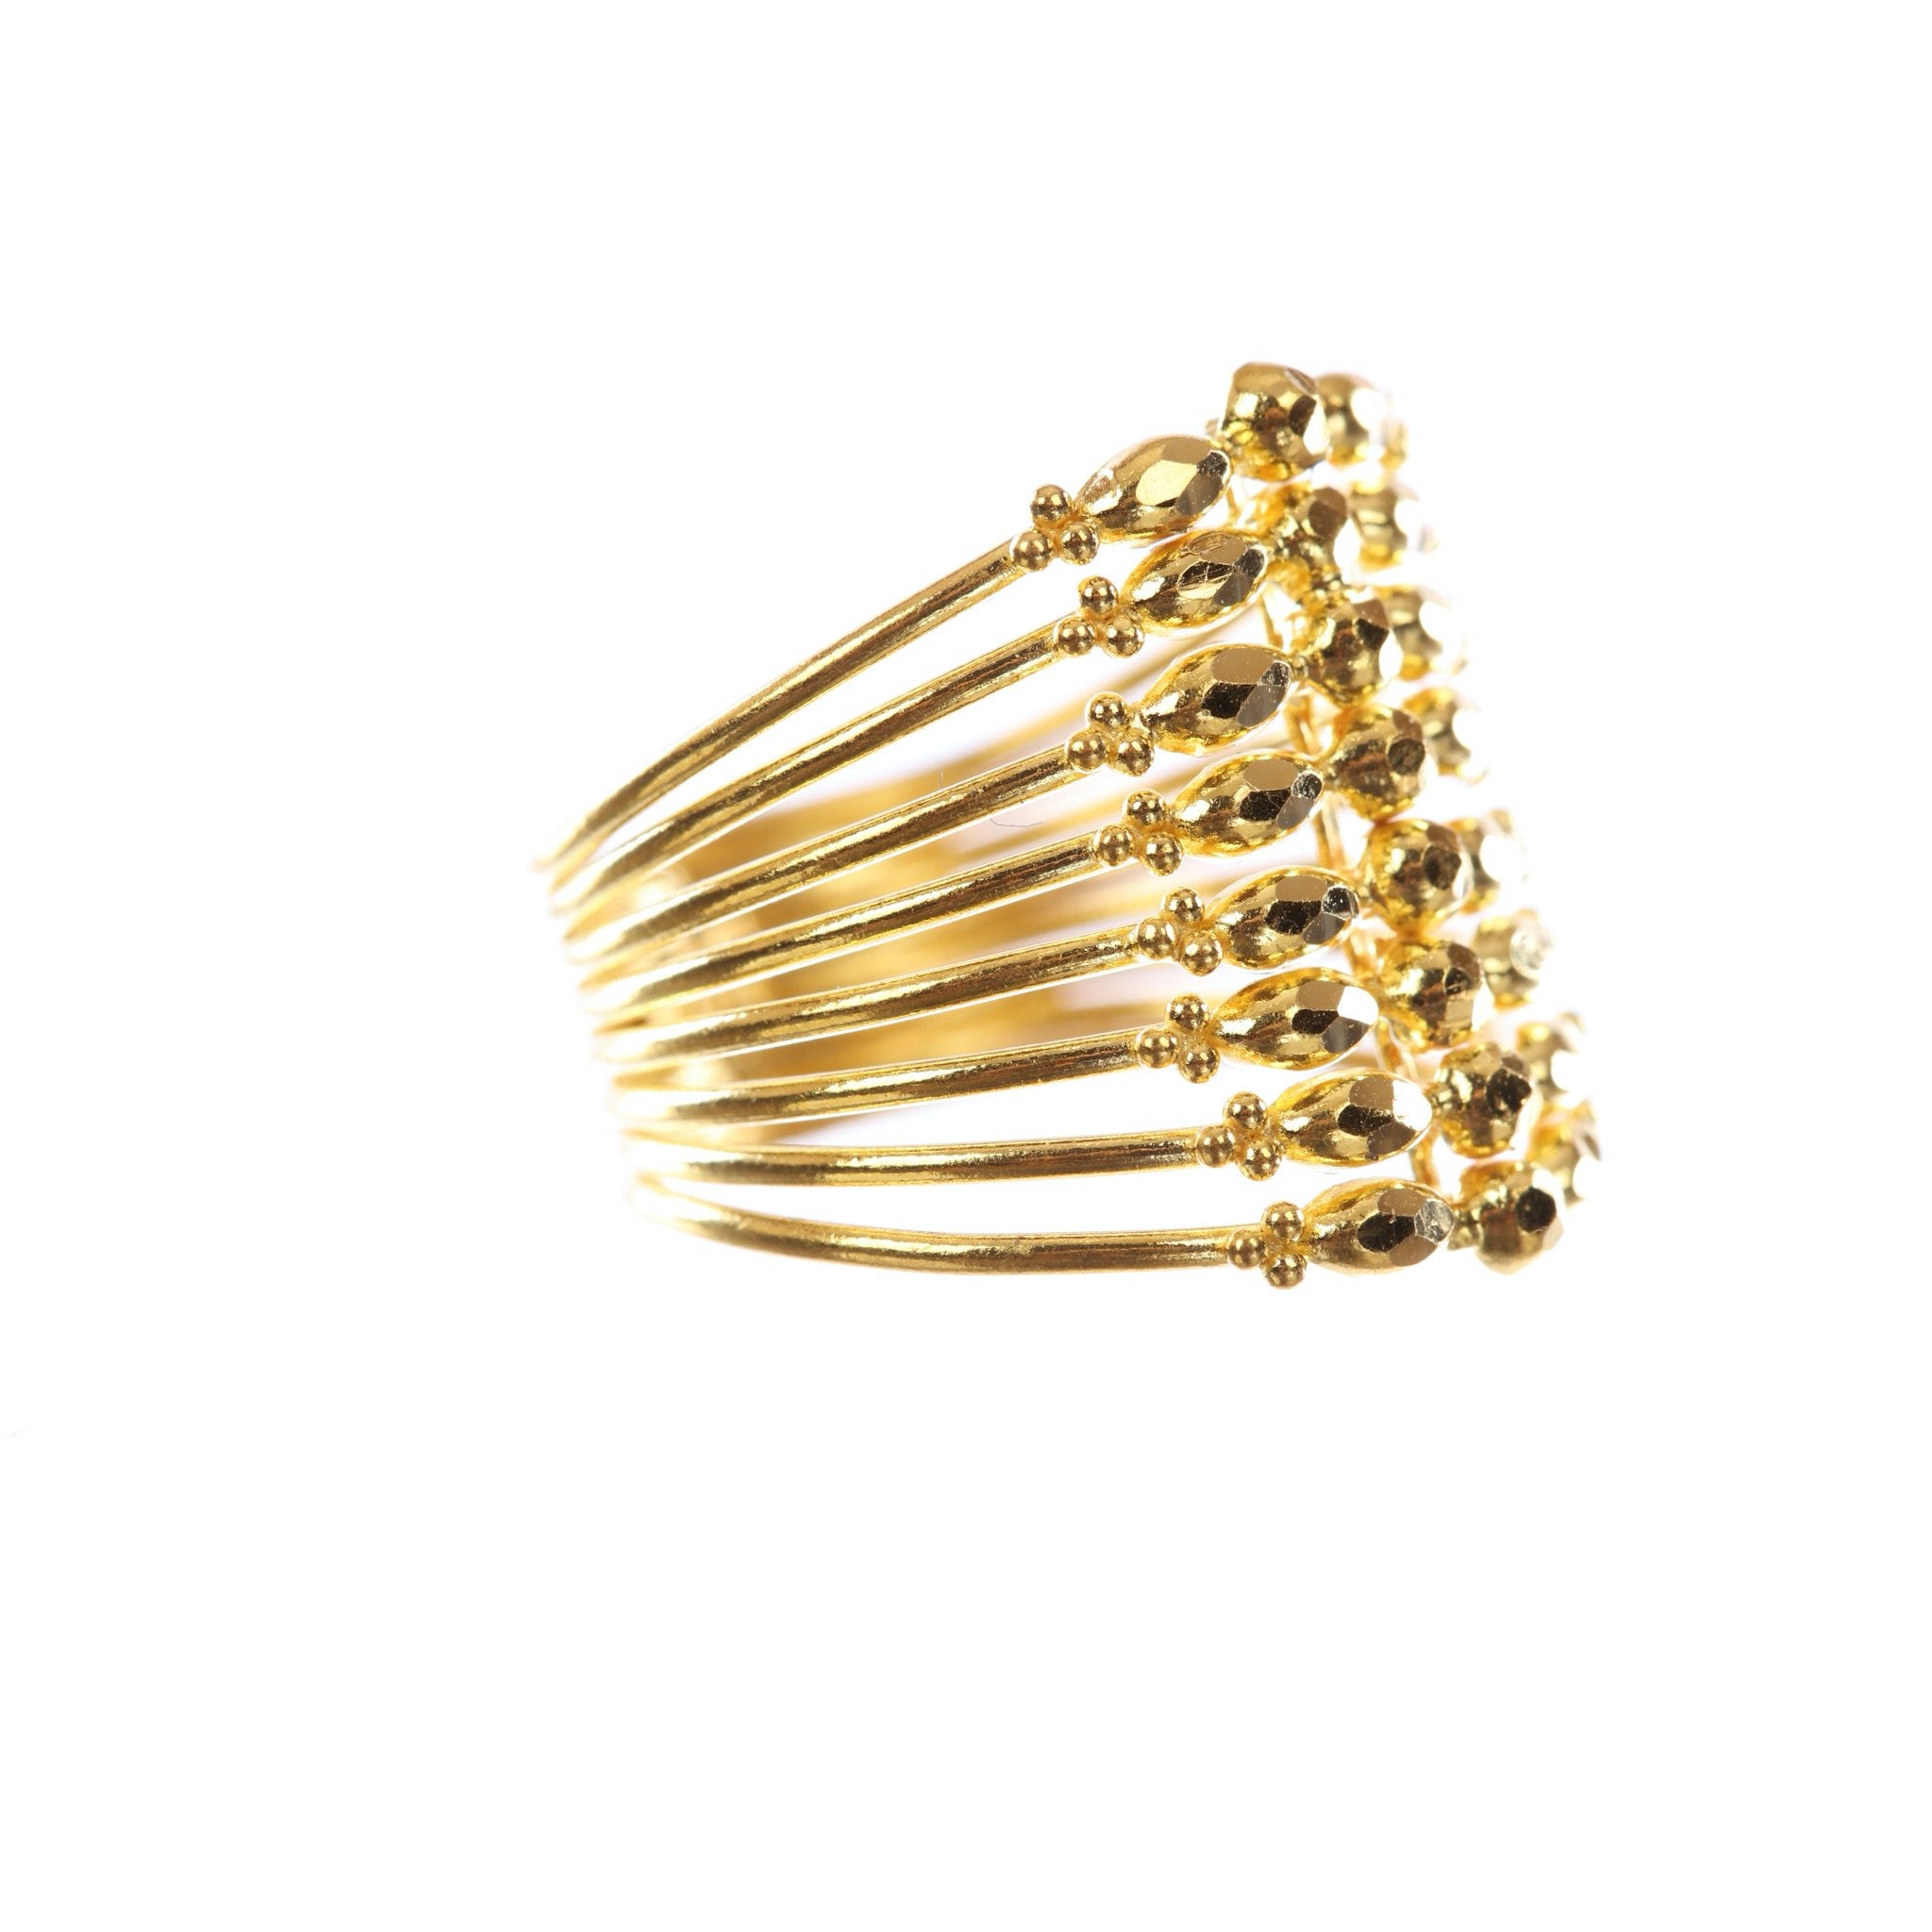 Prounis 22kt Yellow Gold Trade I Ring - Farfetch